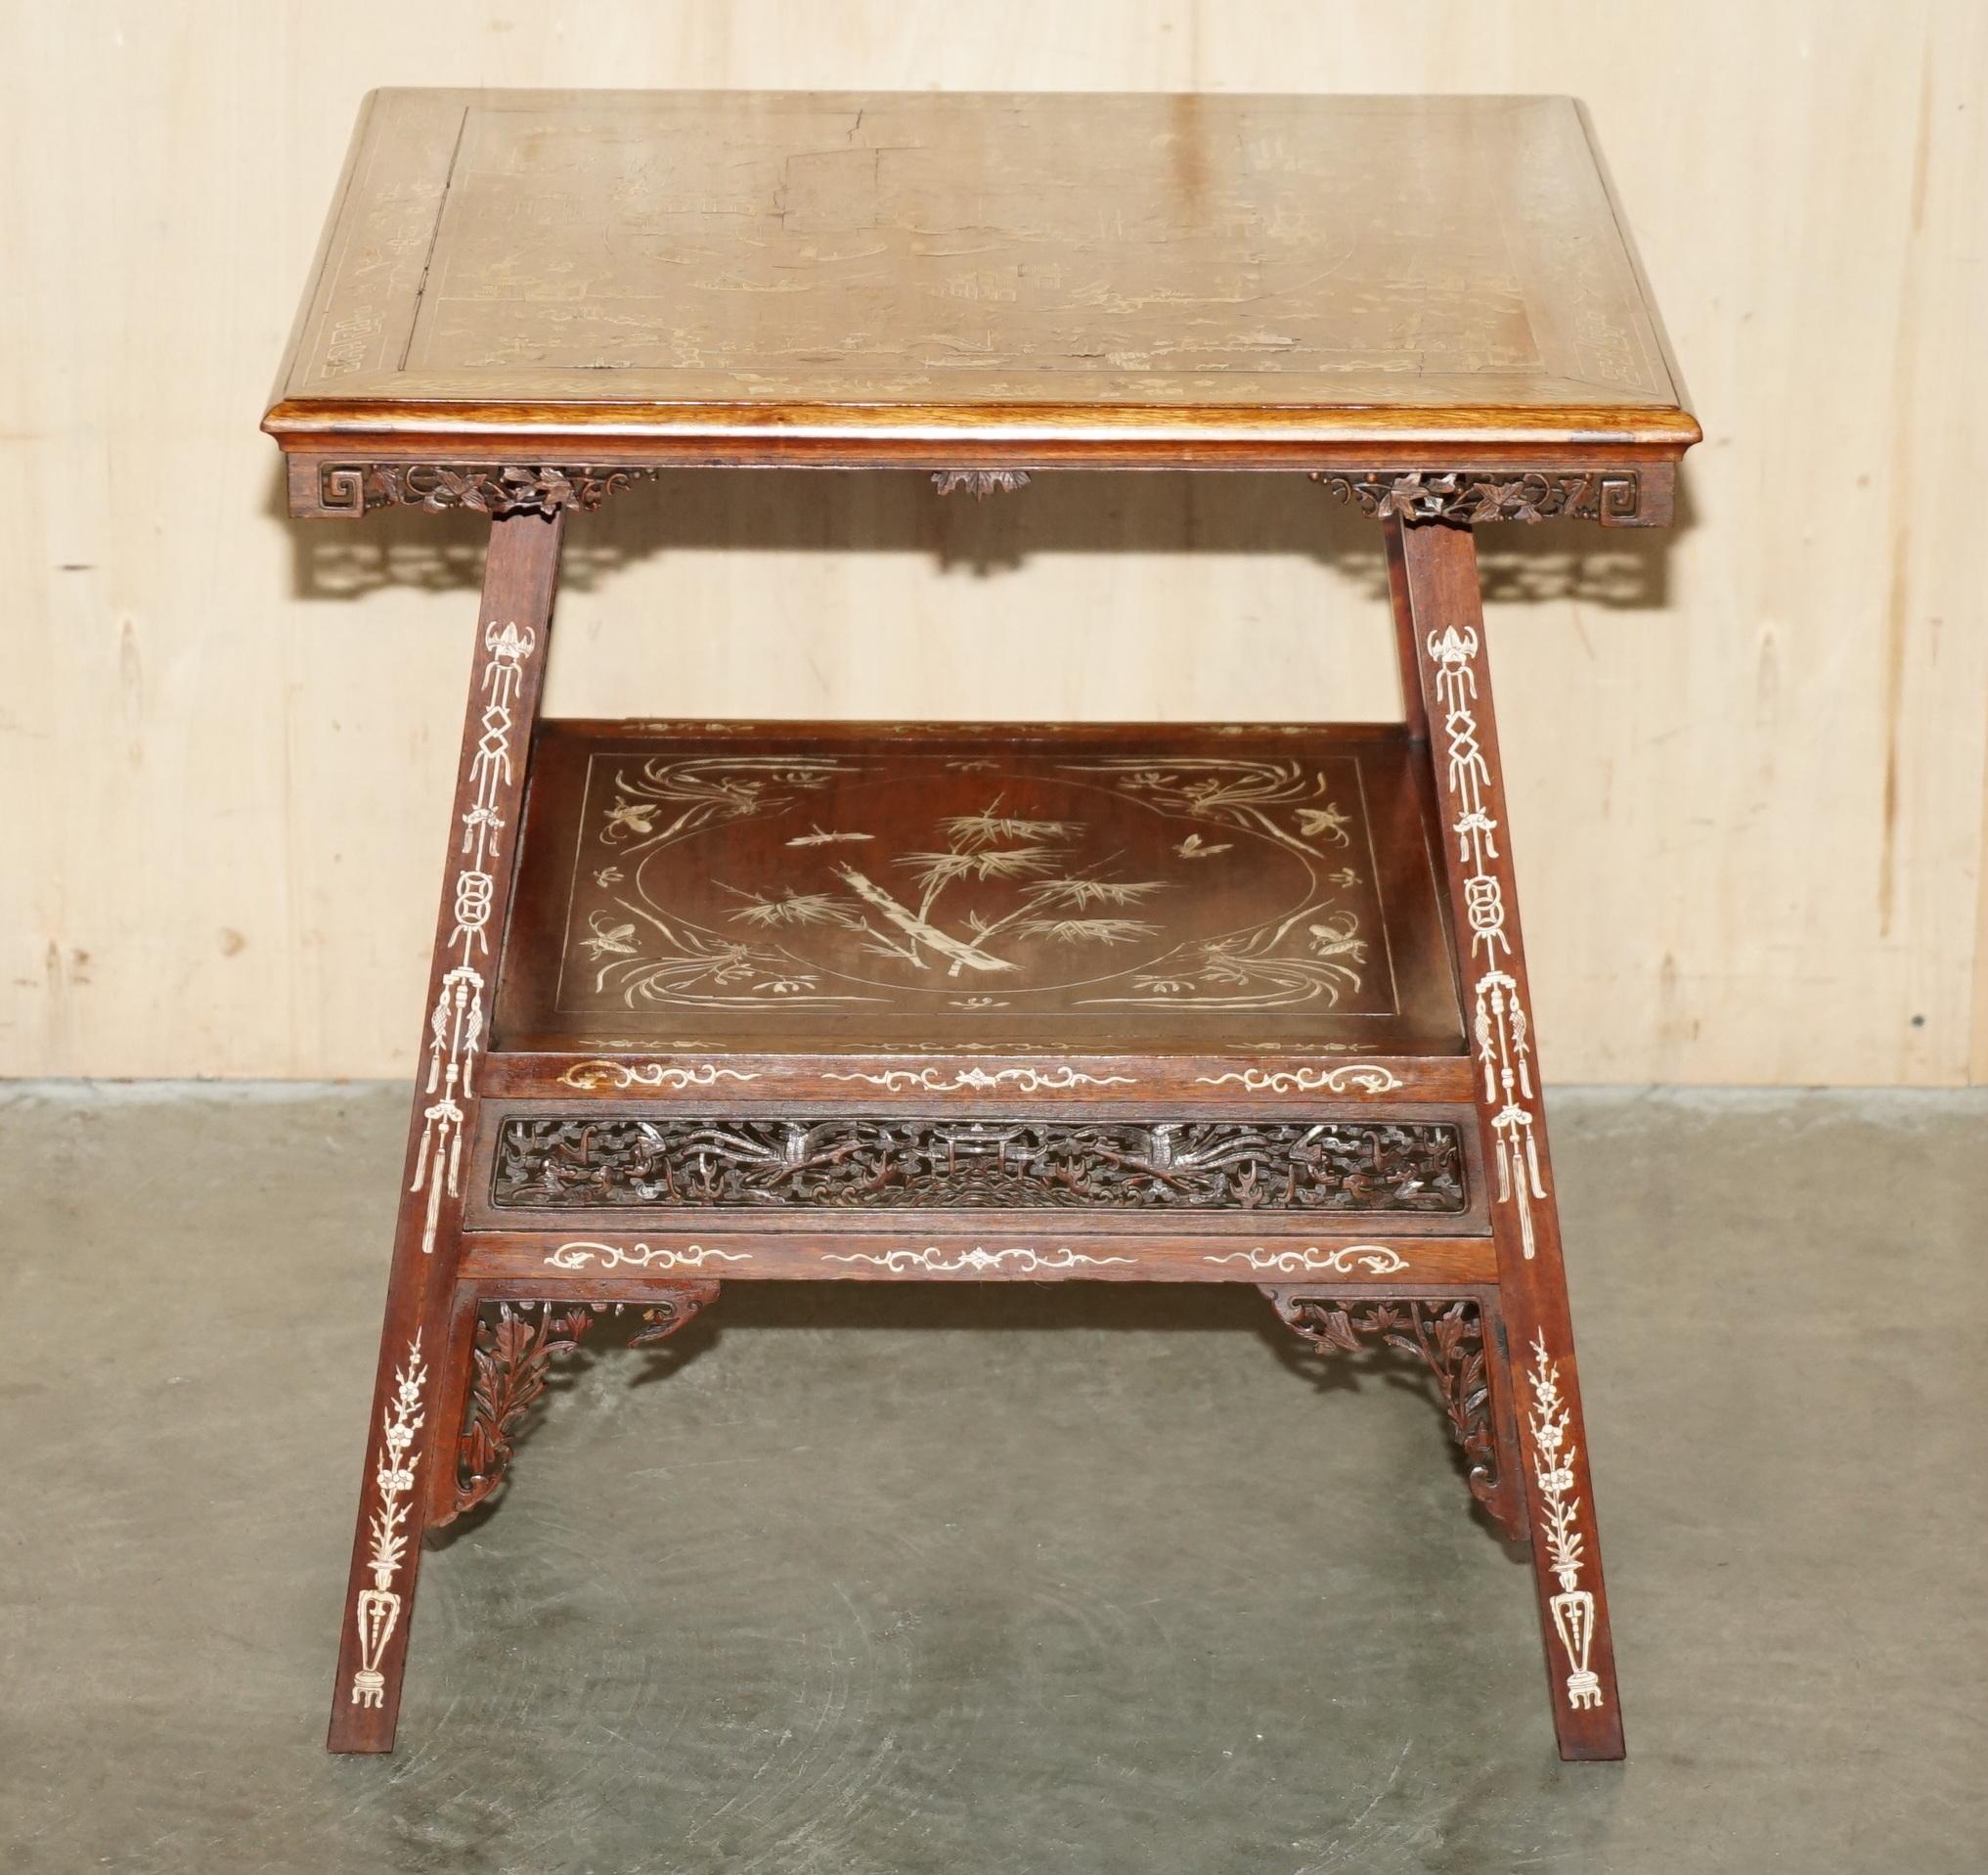 ANTIQUE CIRCA 1900ORNATELY CARVED AND HEAViLY INLAID CHINESE OCCASIONAL TABLE (Chinesischer Export) im Angebot